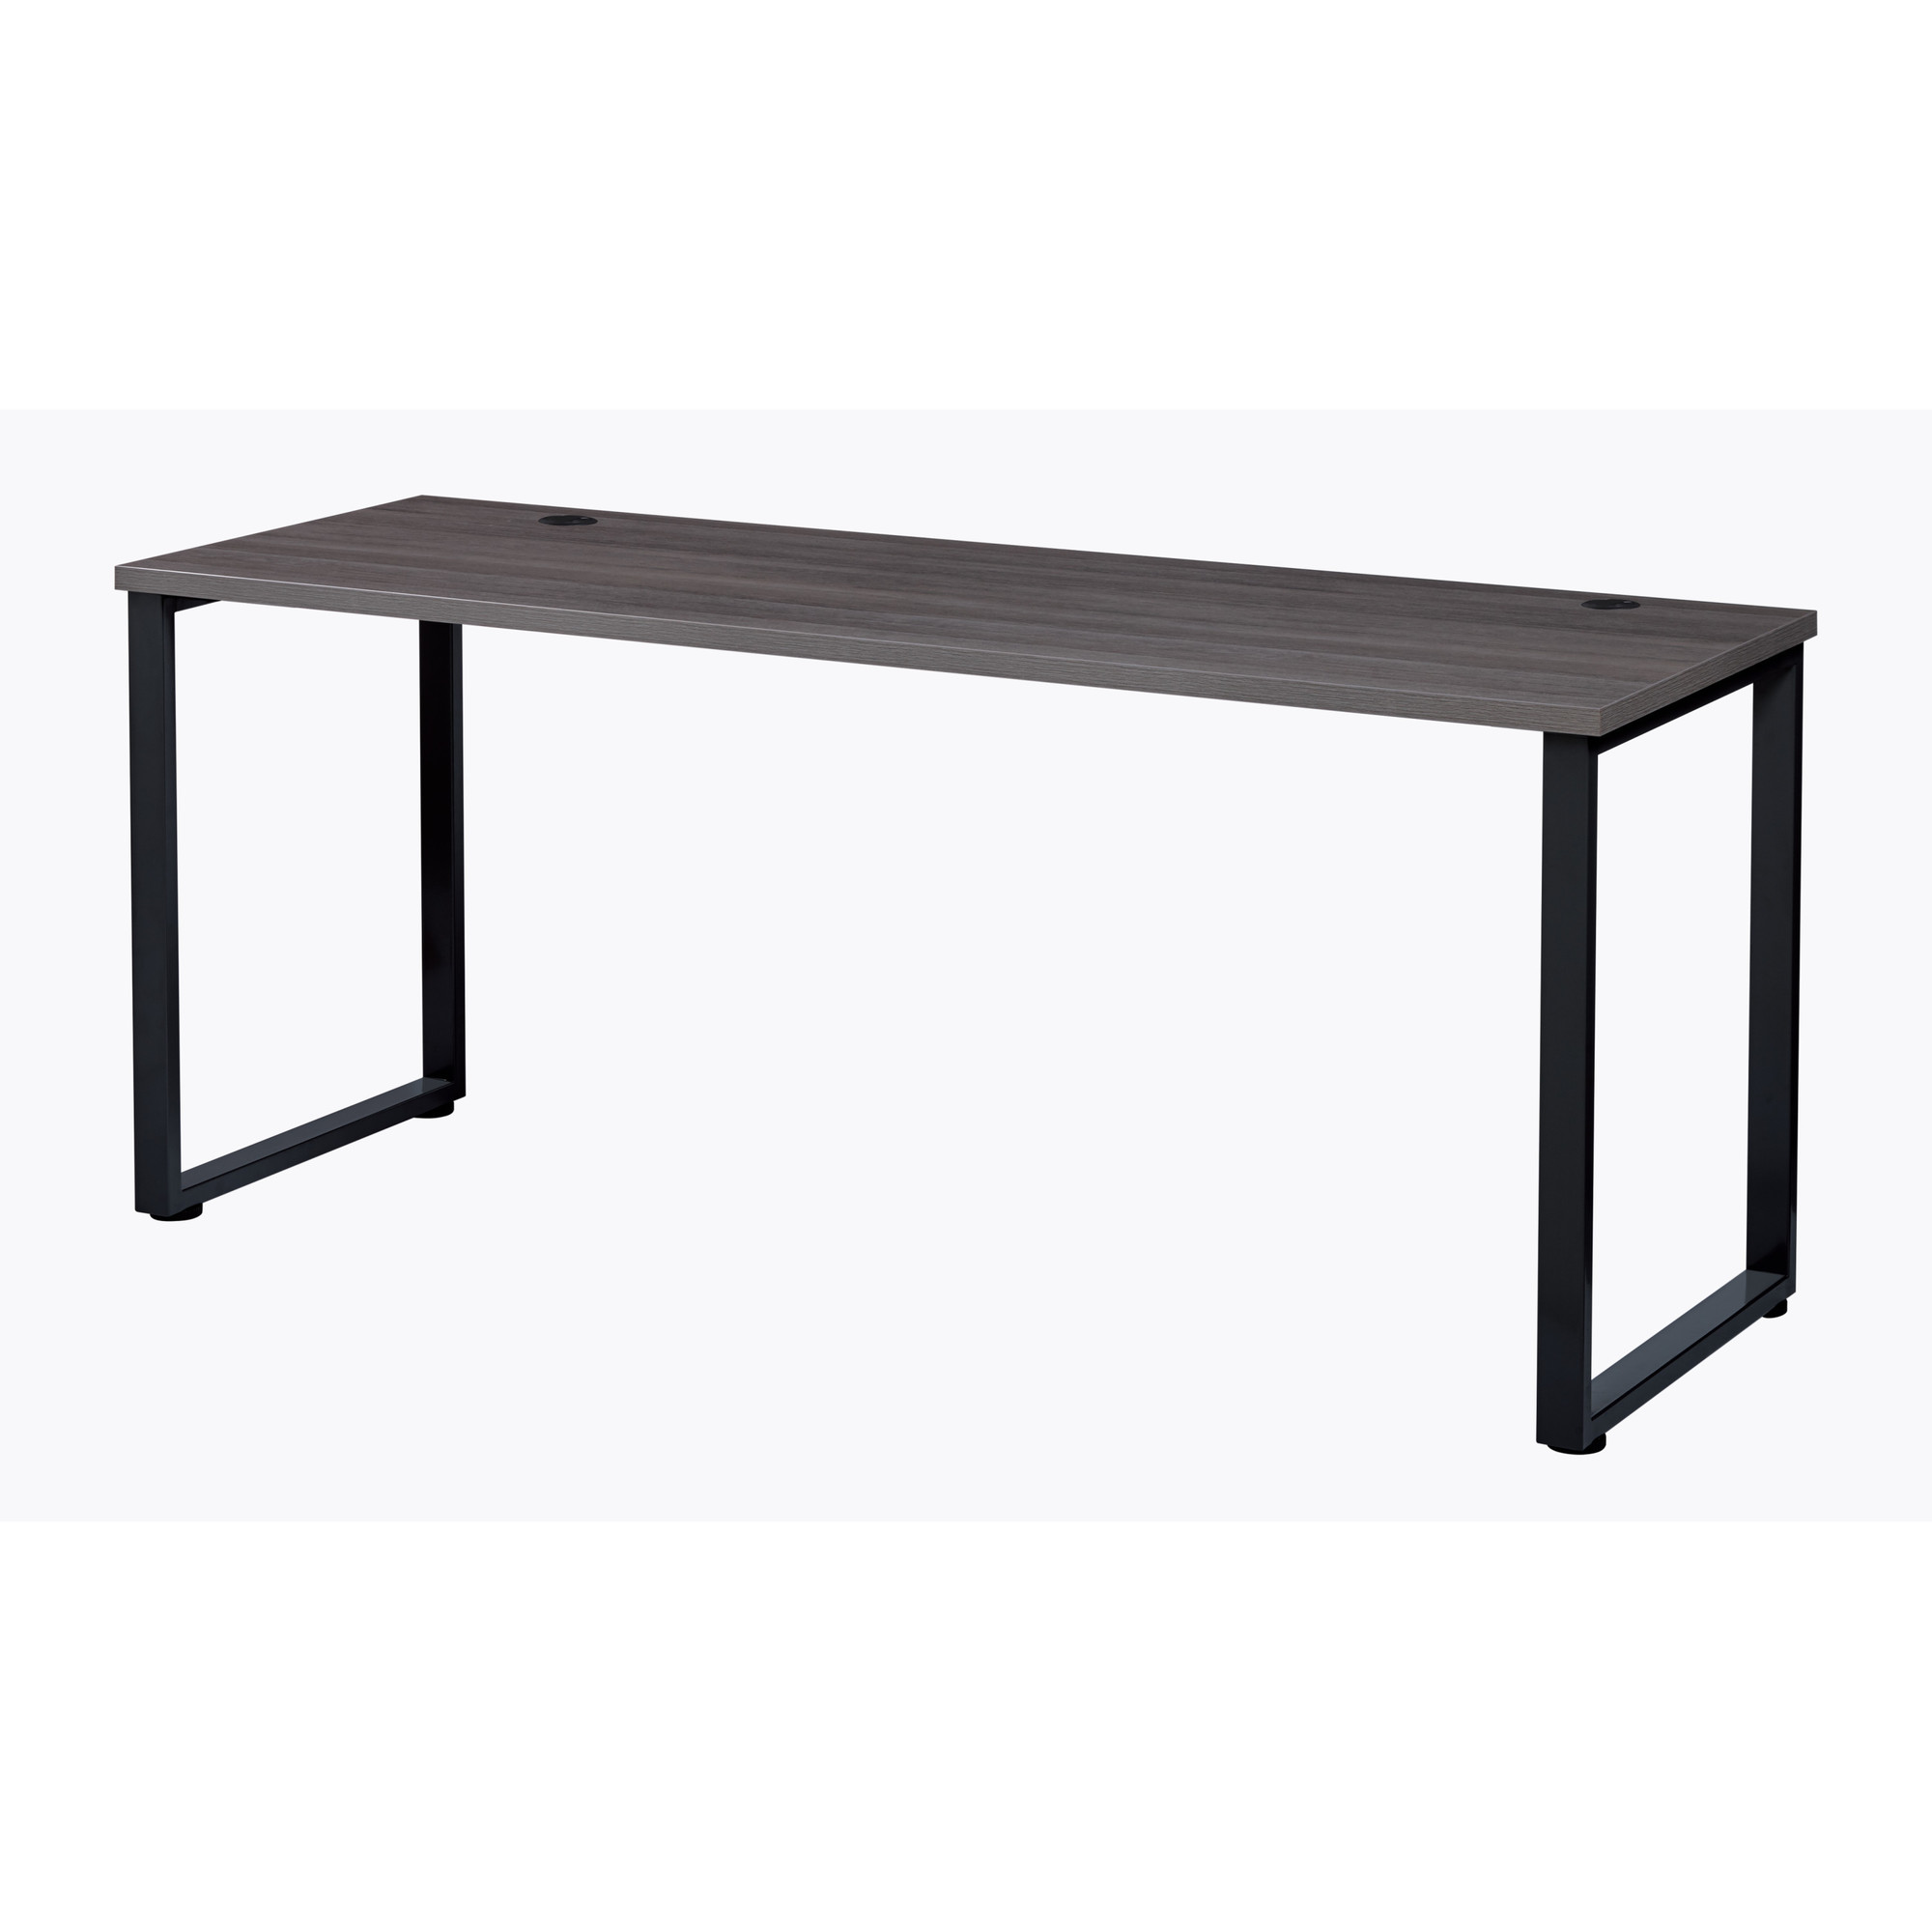 Hirsh Industries, Office Dimensions Open Desk with O-leg, Width 59 in, Height 29.9 in, Depth 23.6 in, Model 24786